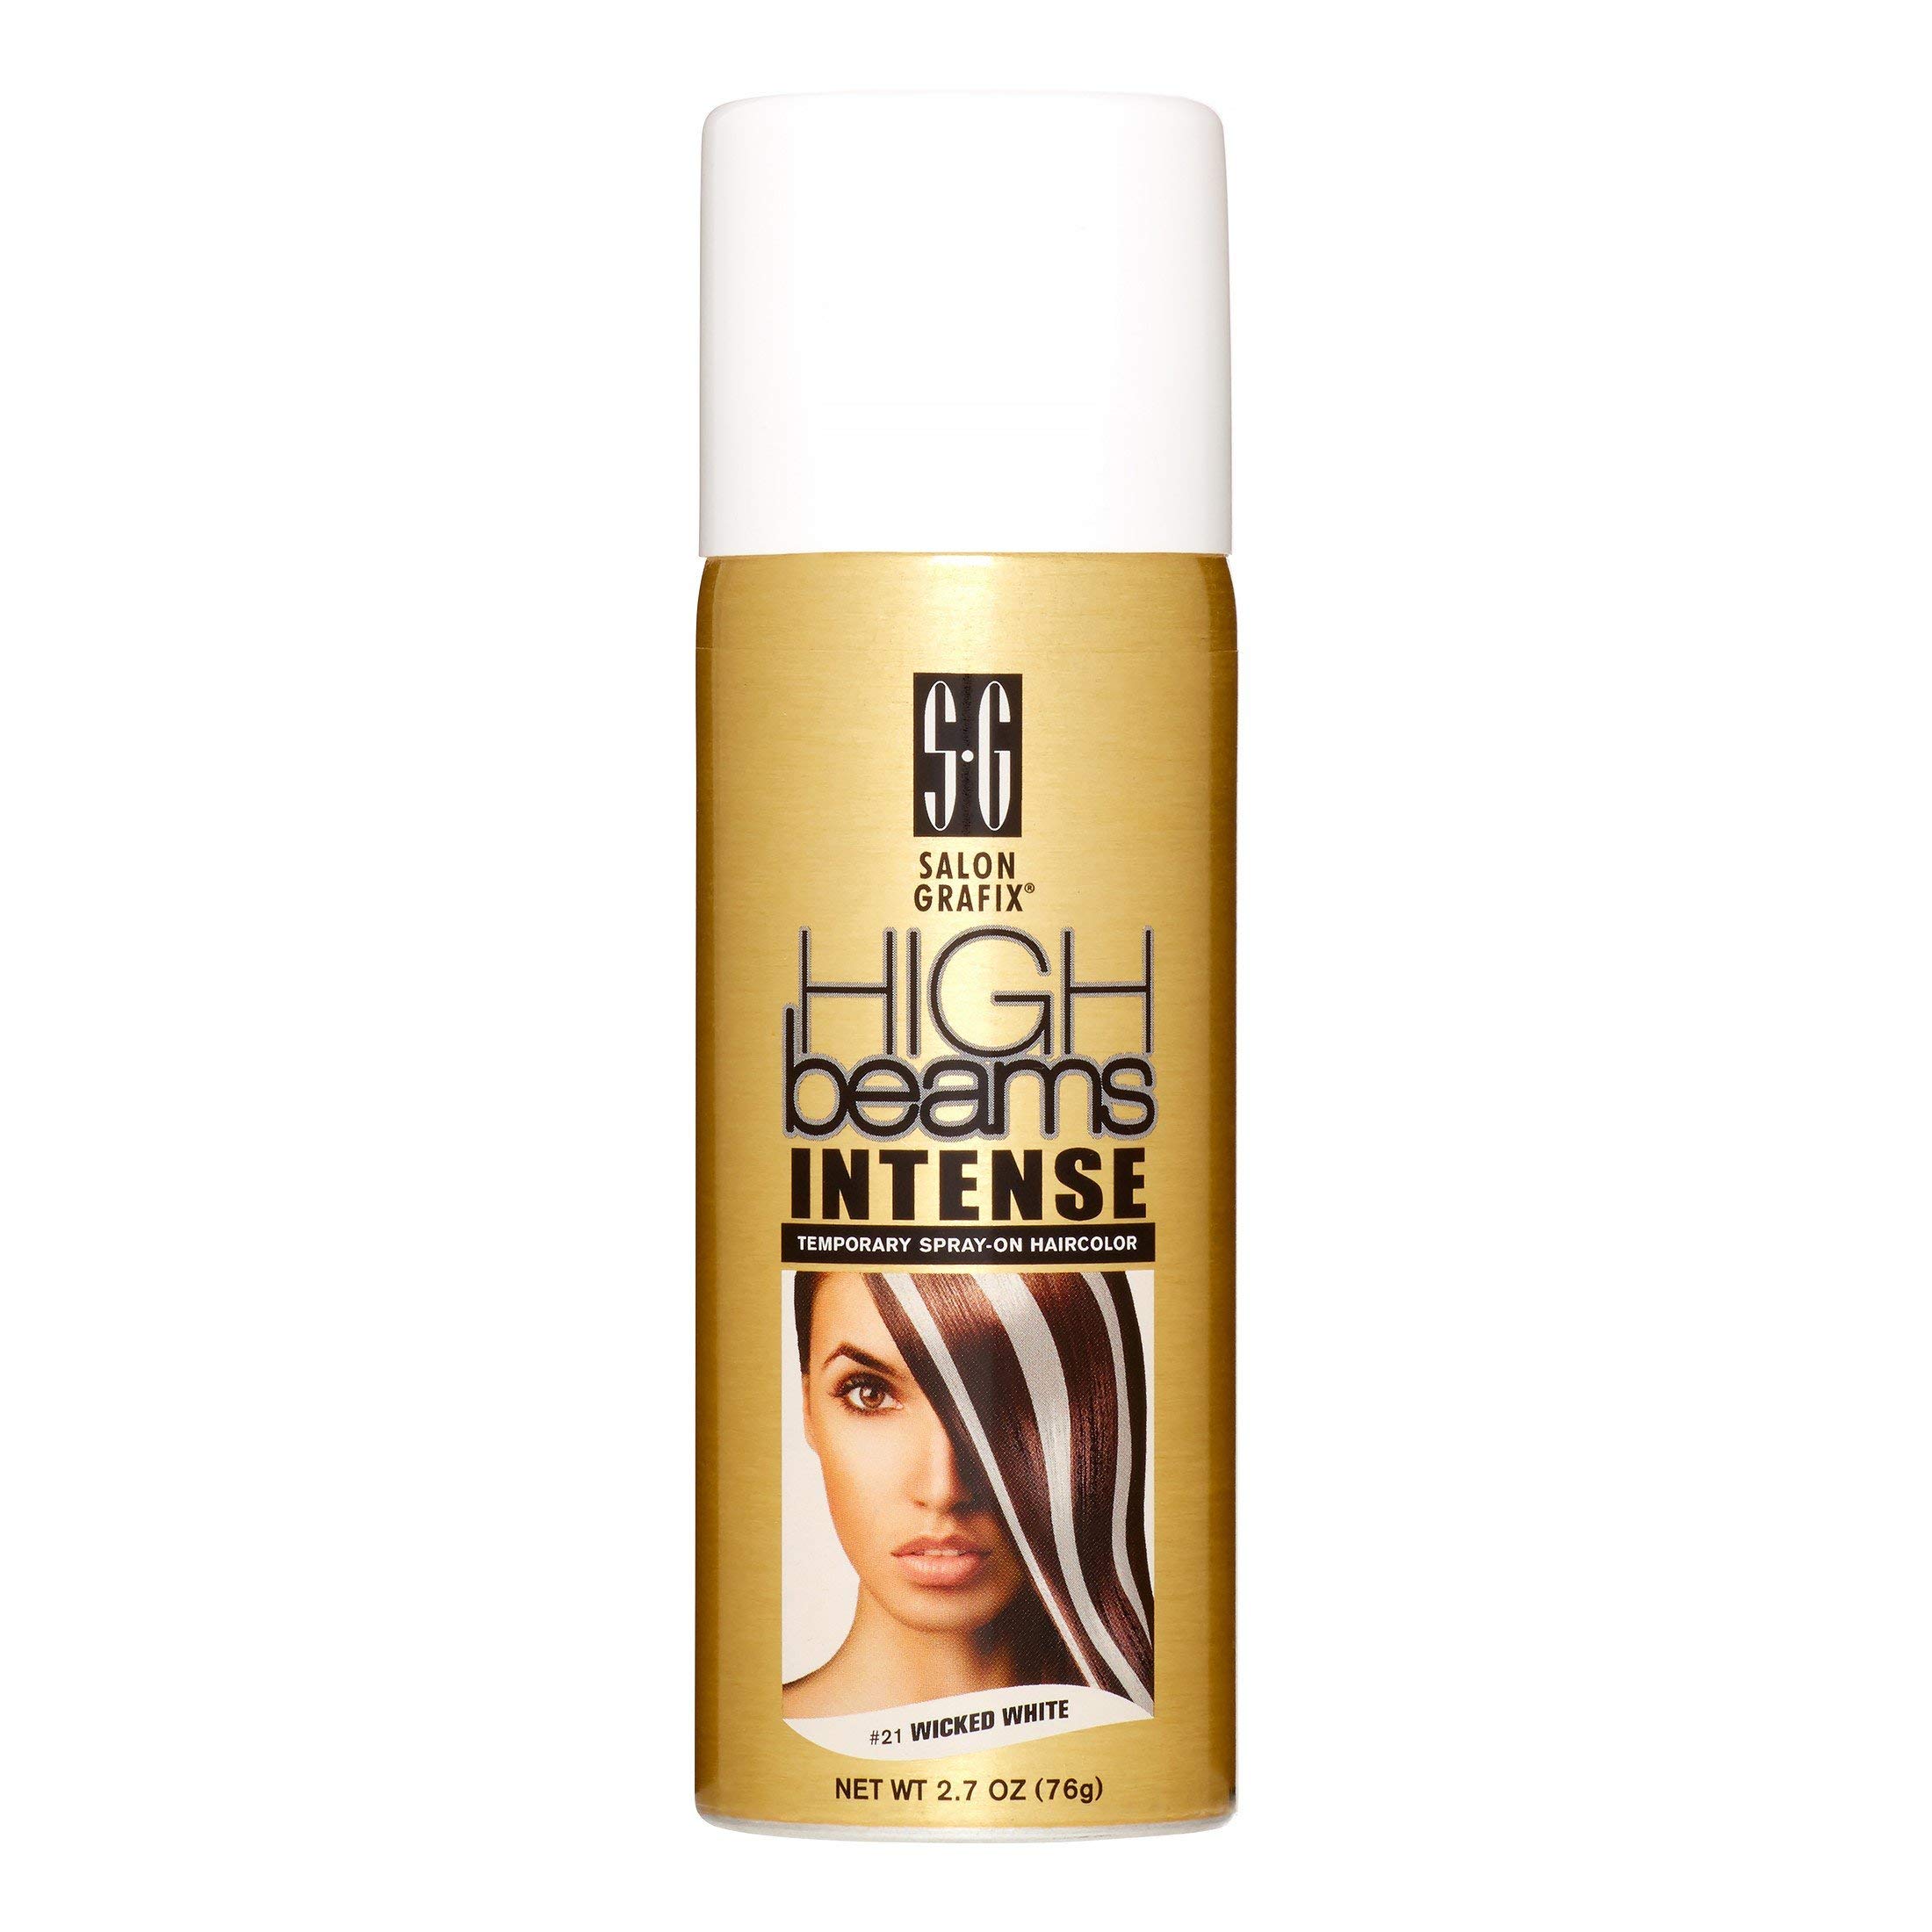 High Beams Intense Spray-On Hair Color –Wicked White - 2.7 Oz - Add Temporary Color Highlight to Your Hair Instantly - Great for Streaking, Tipping or Frosting - Washes out Easily